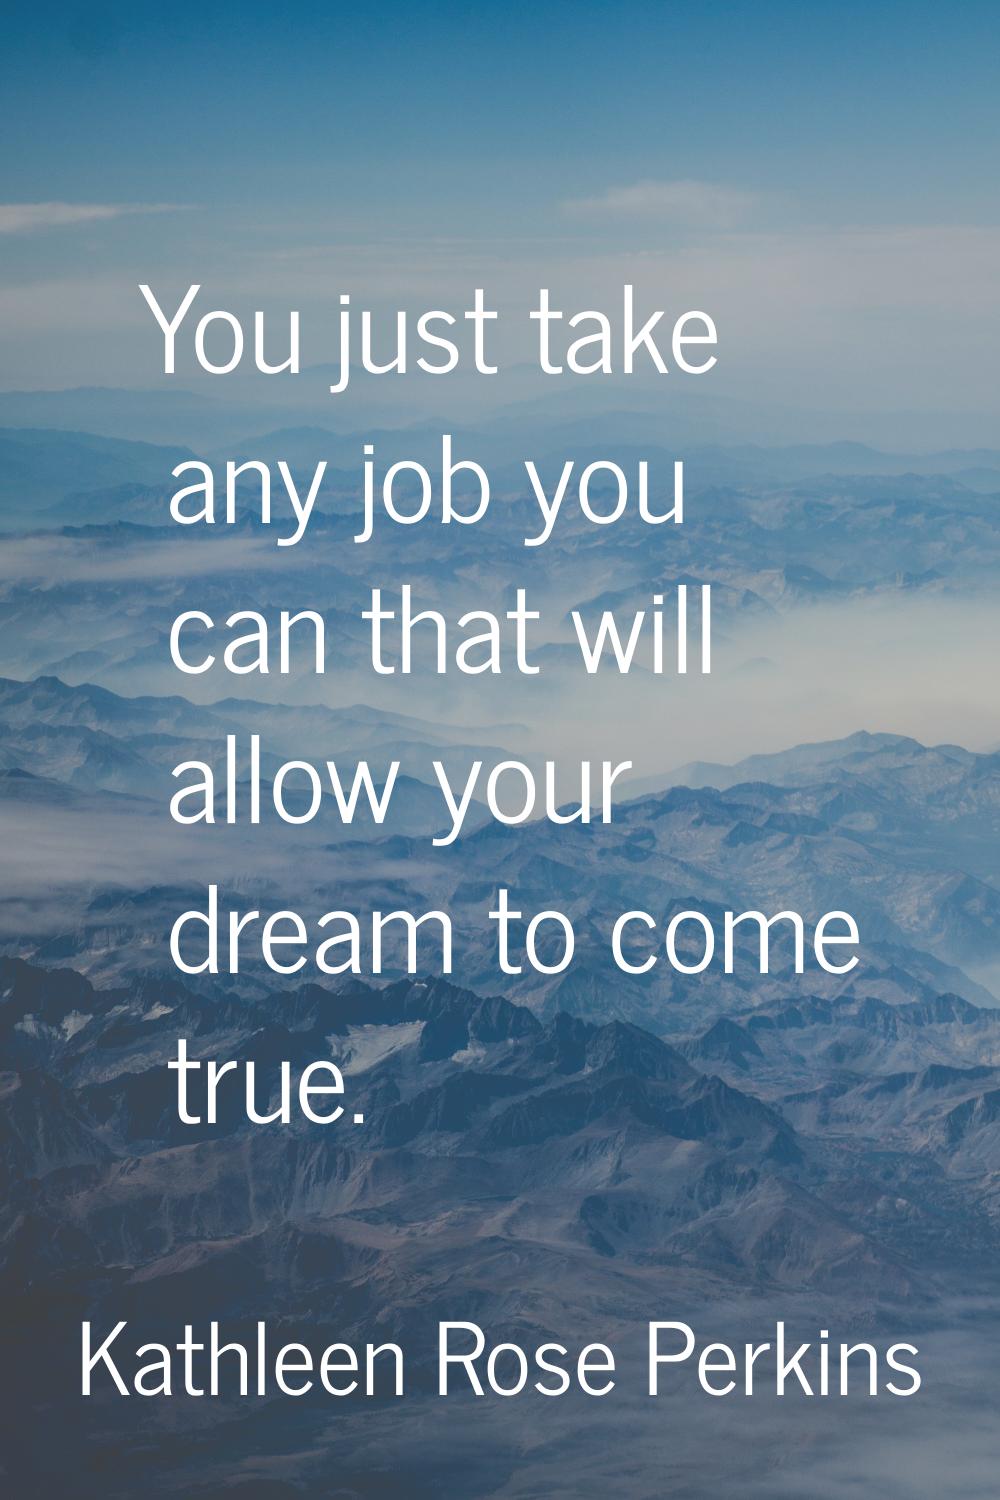 You just take any job you can that will allow your dream to come true.